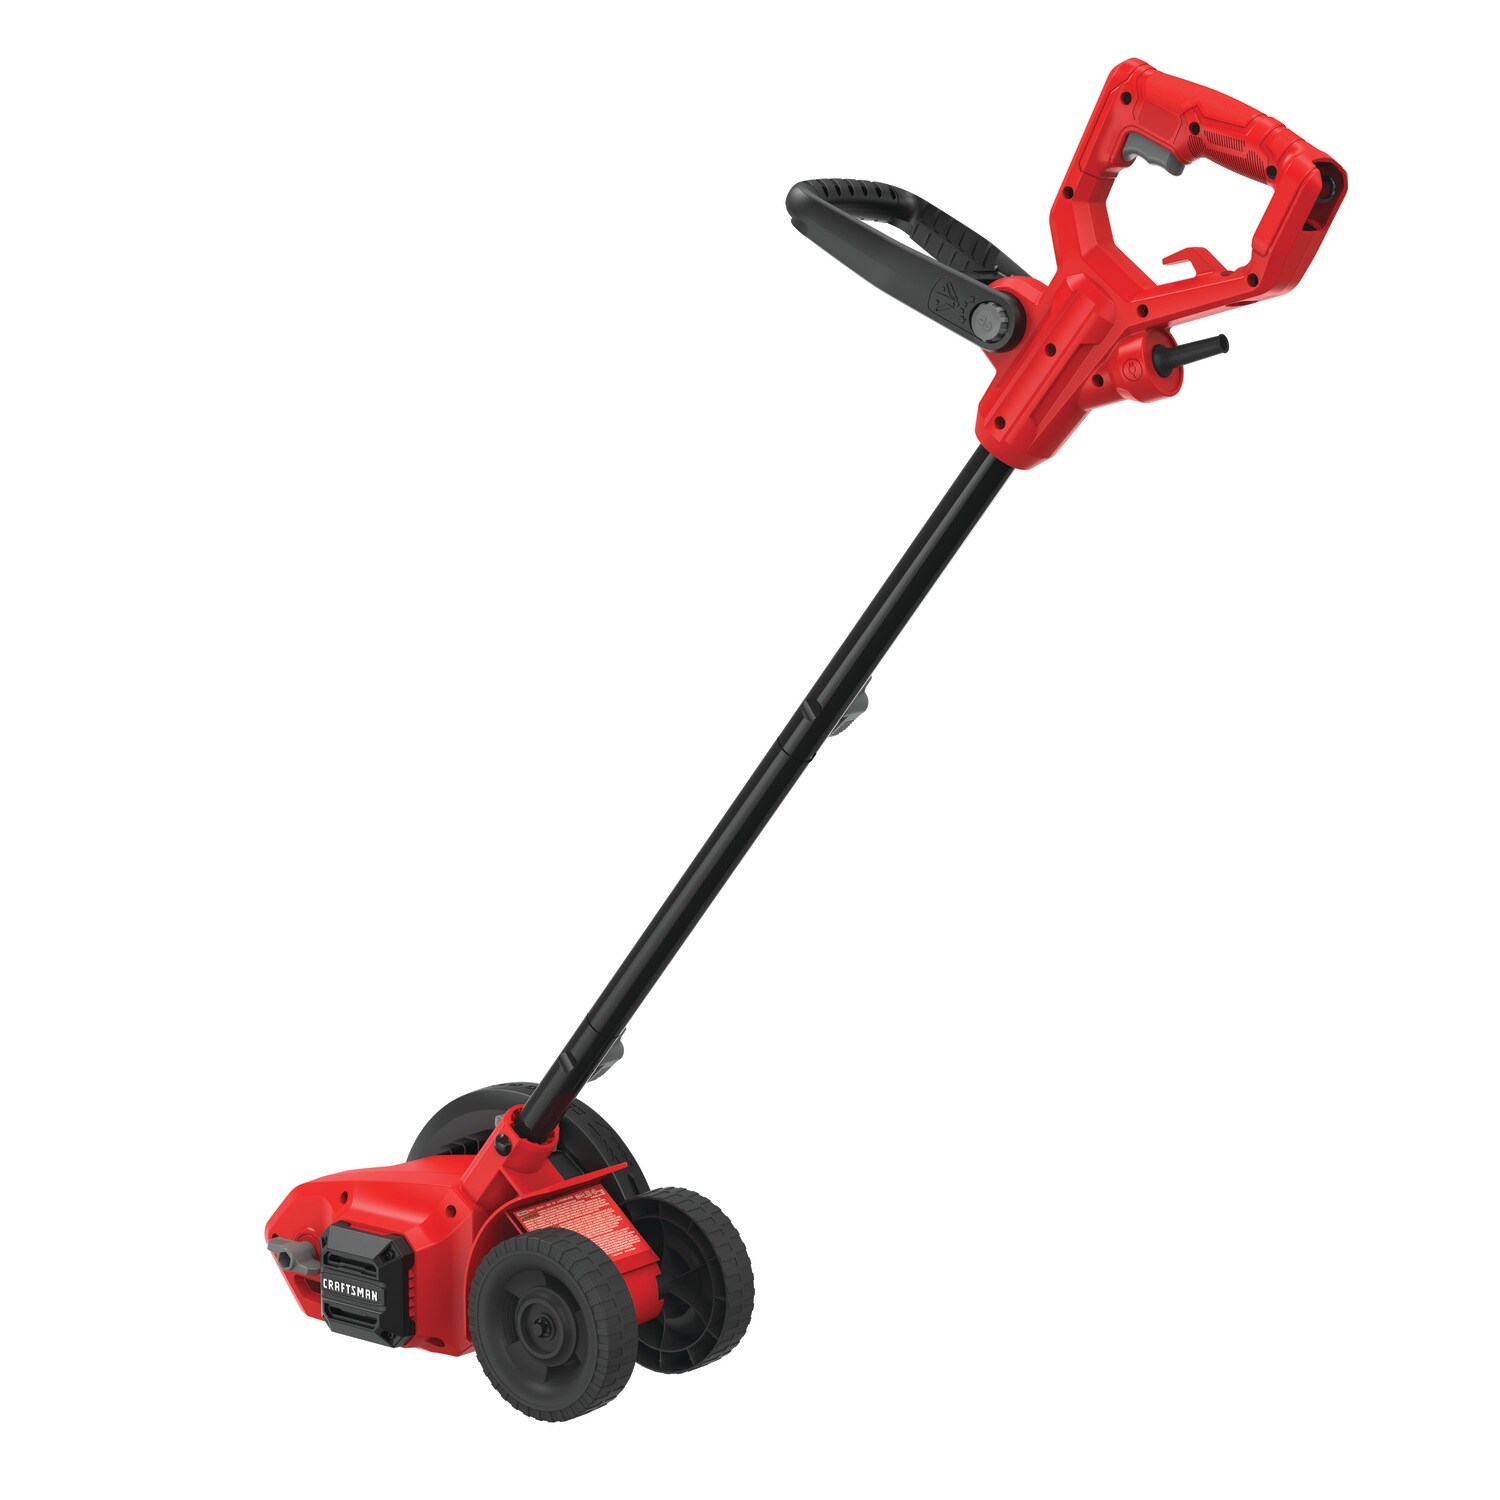 https://discounttoday.net/wp-content/uploads/2022/09/CRAFTSMAN-CMEED400-7.5-in-Push-Walk-Behind-Electric-Lawn-Edger8.jpg